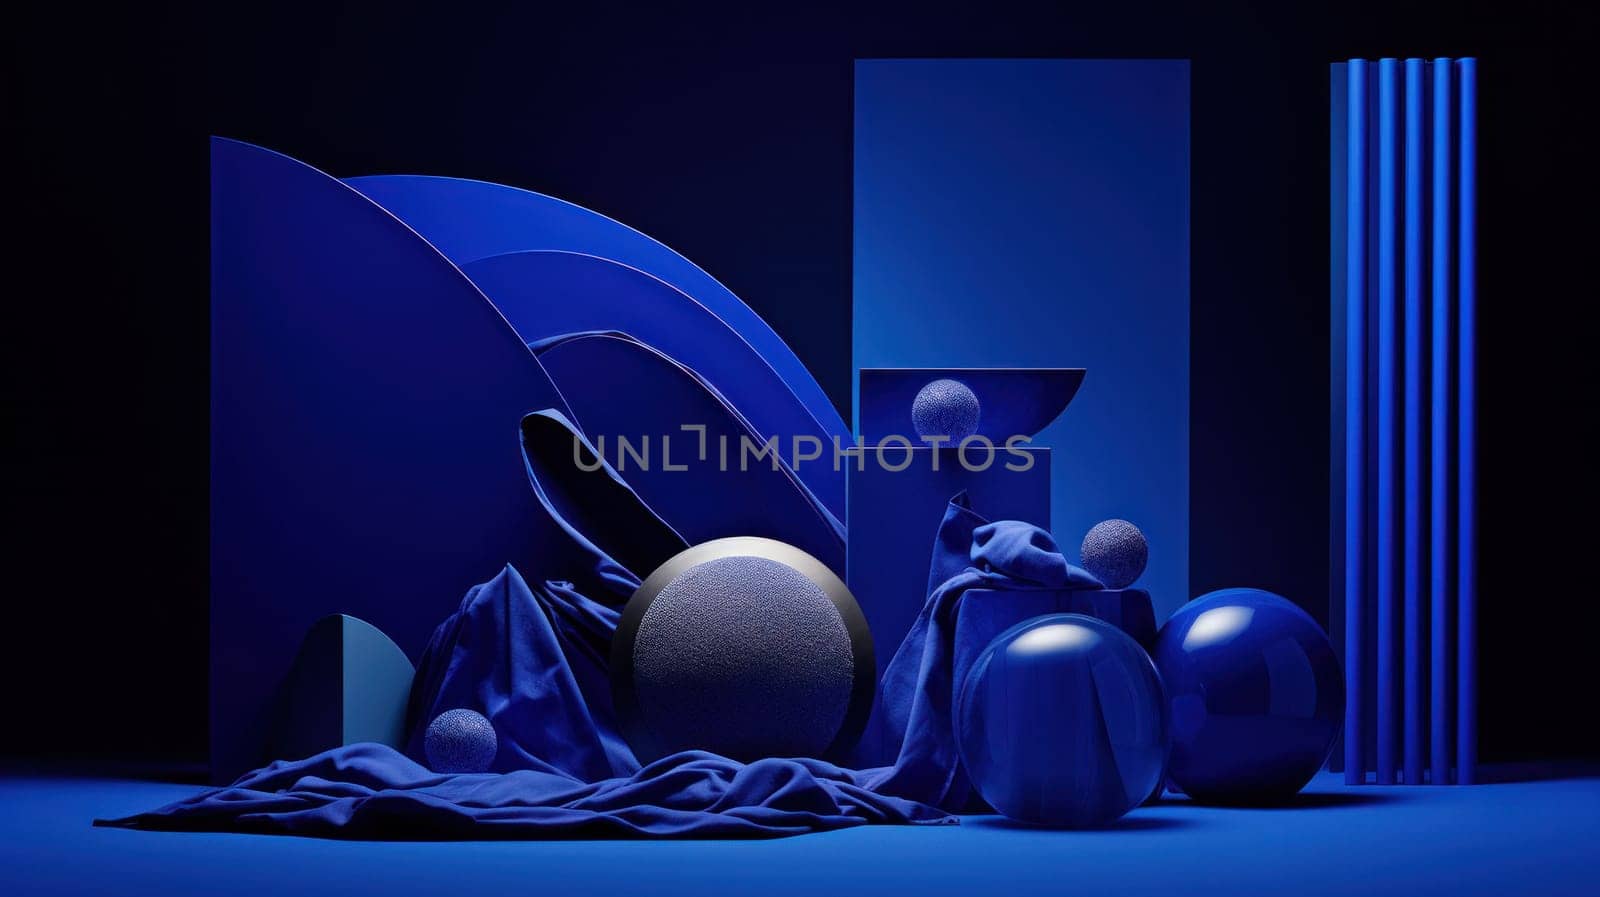 A group of blue objects are arranged on a dark background